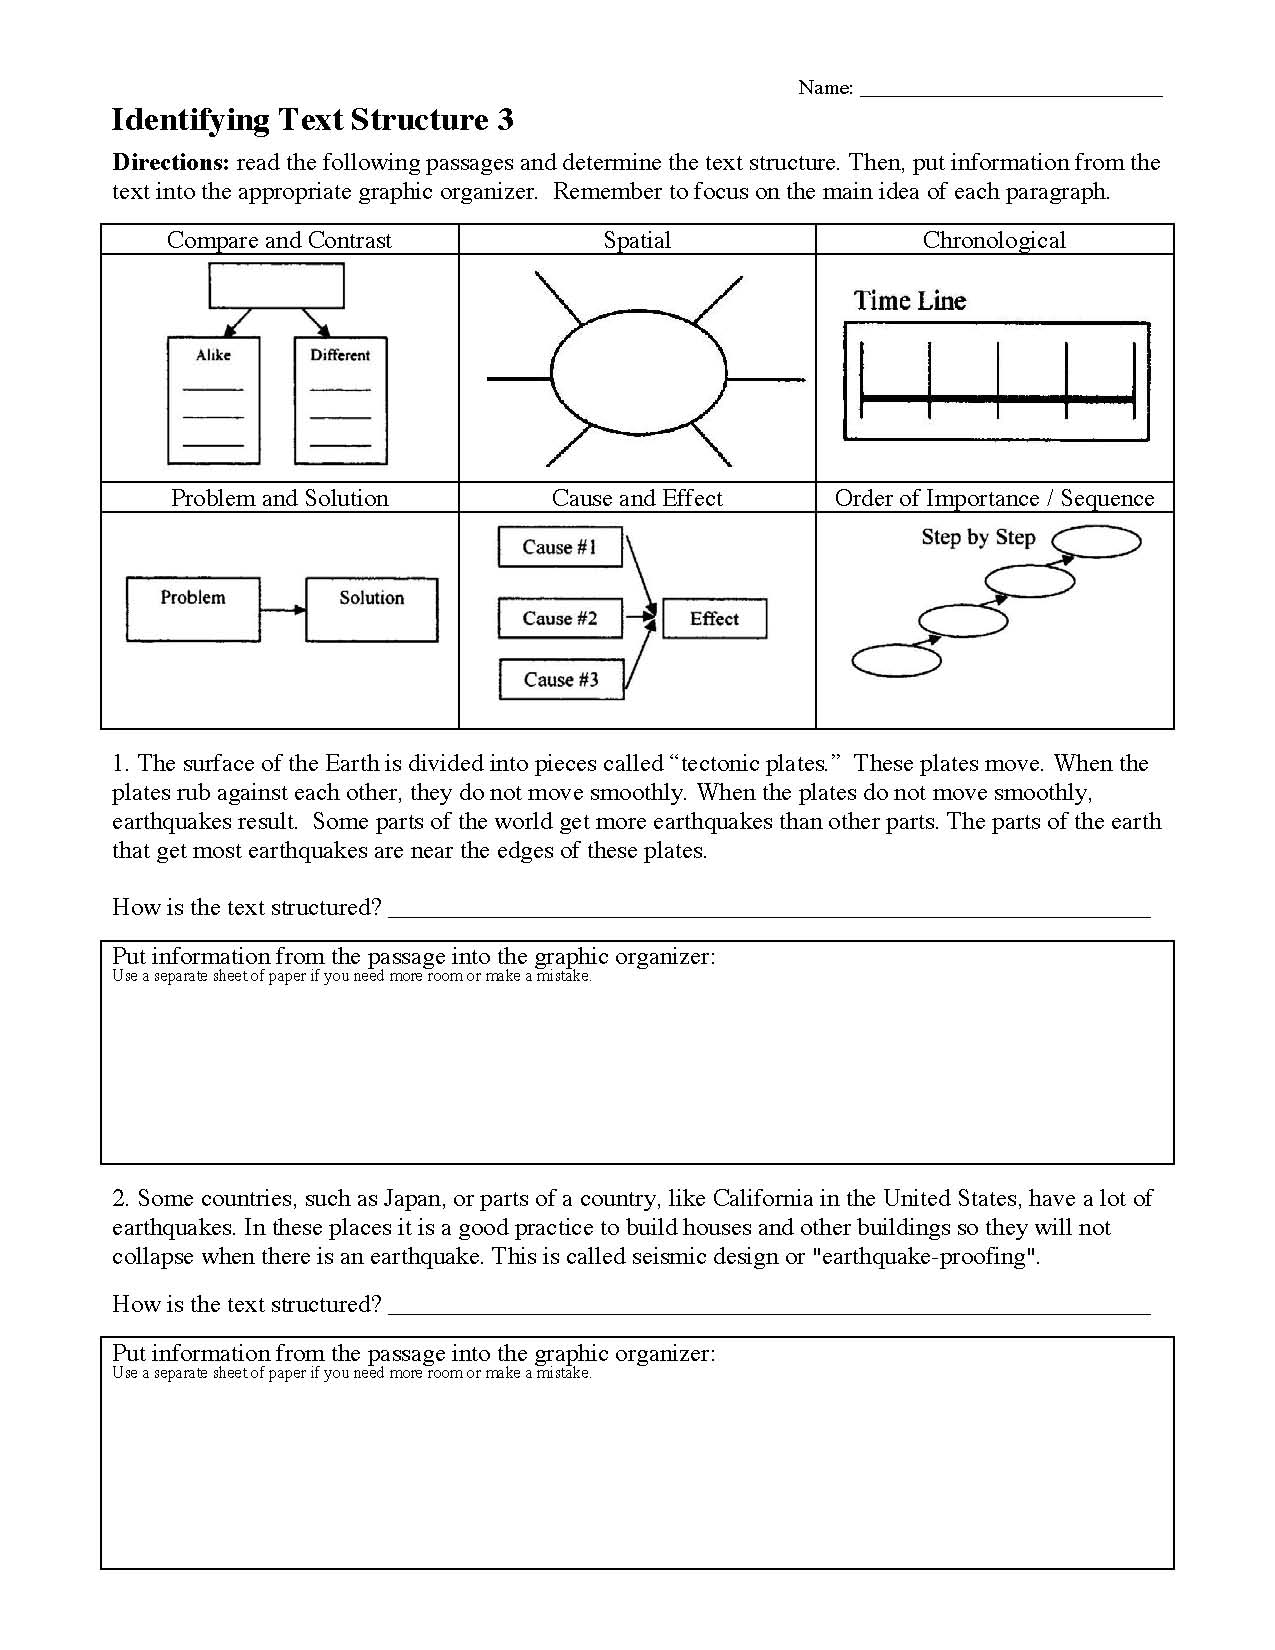 Ereadingworksheets Text Structure Practice 1 - Maryann Kirby's Reading